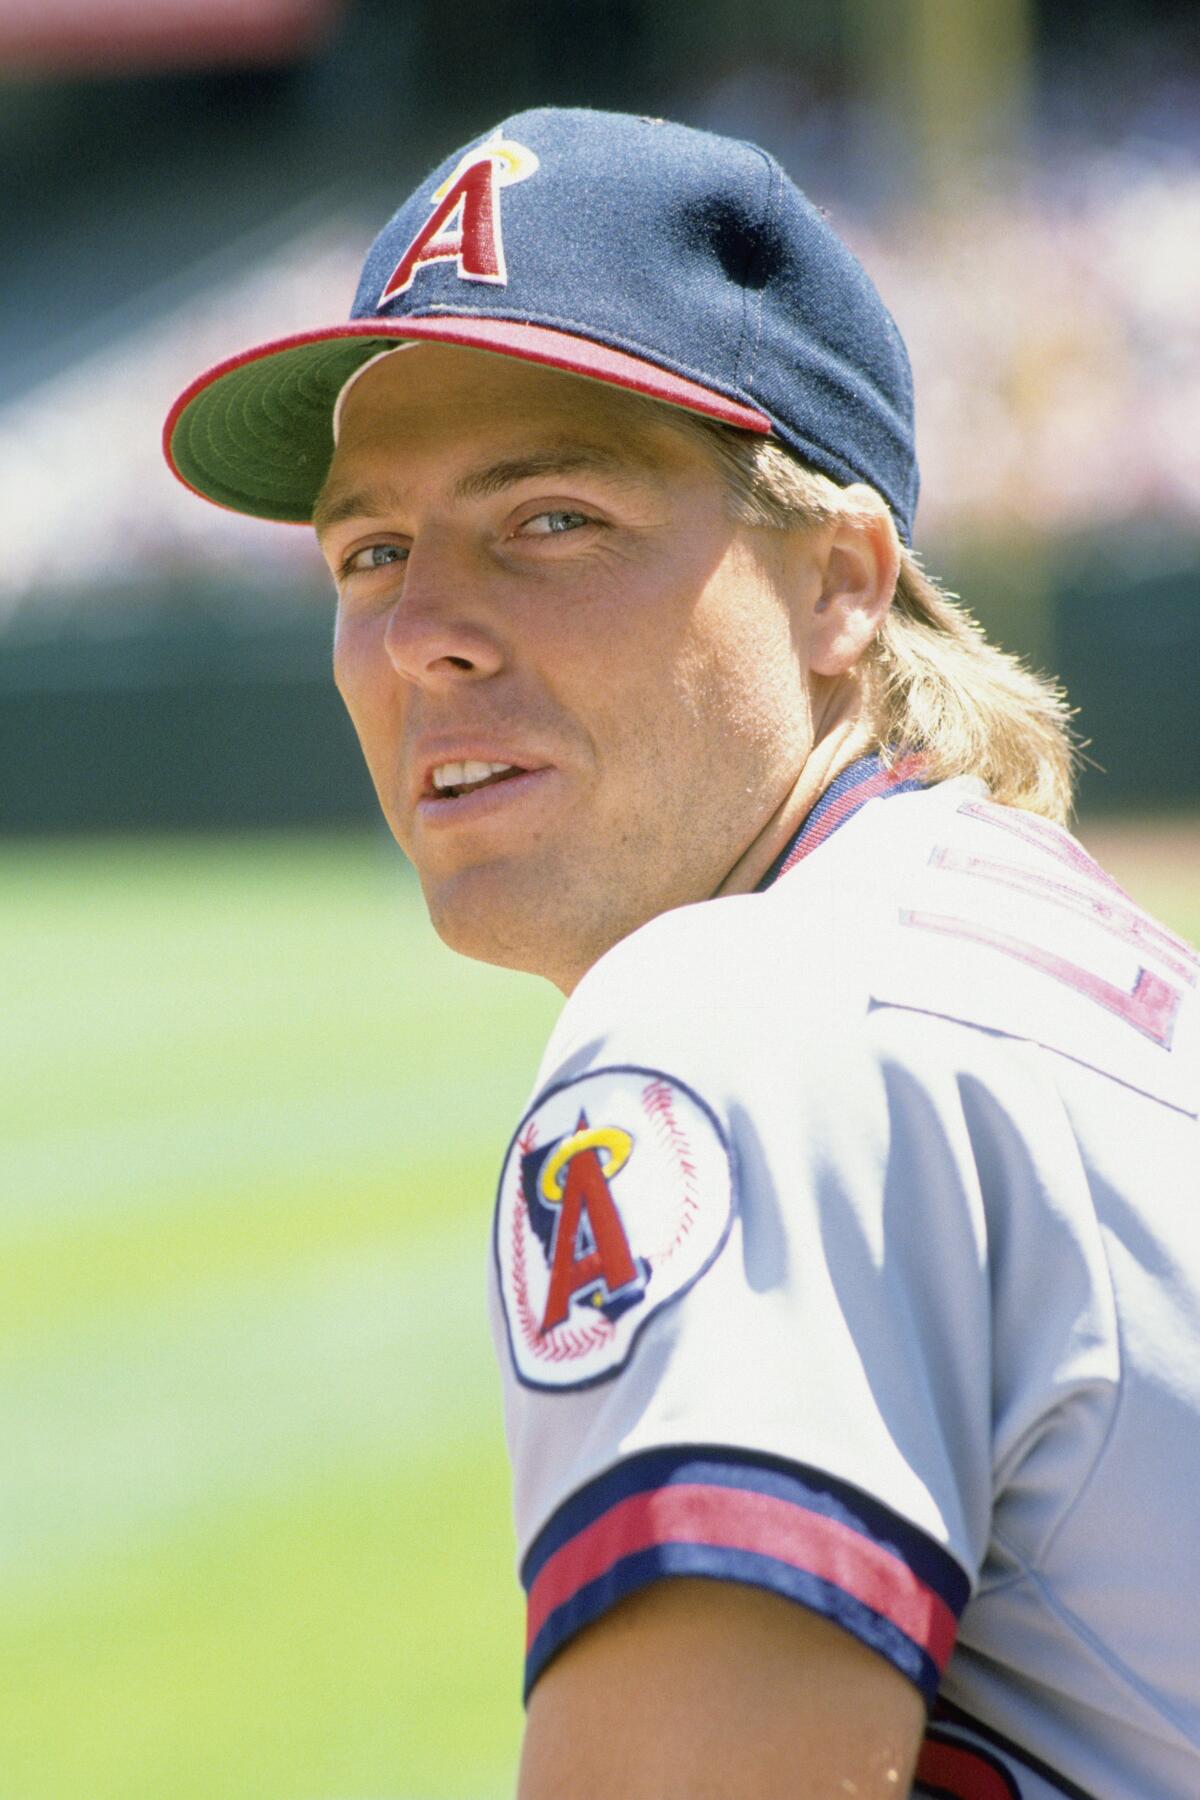 Mark Langston played for the Angels from 1990-97.